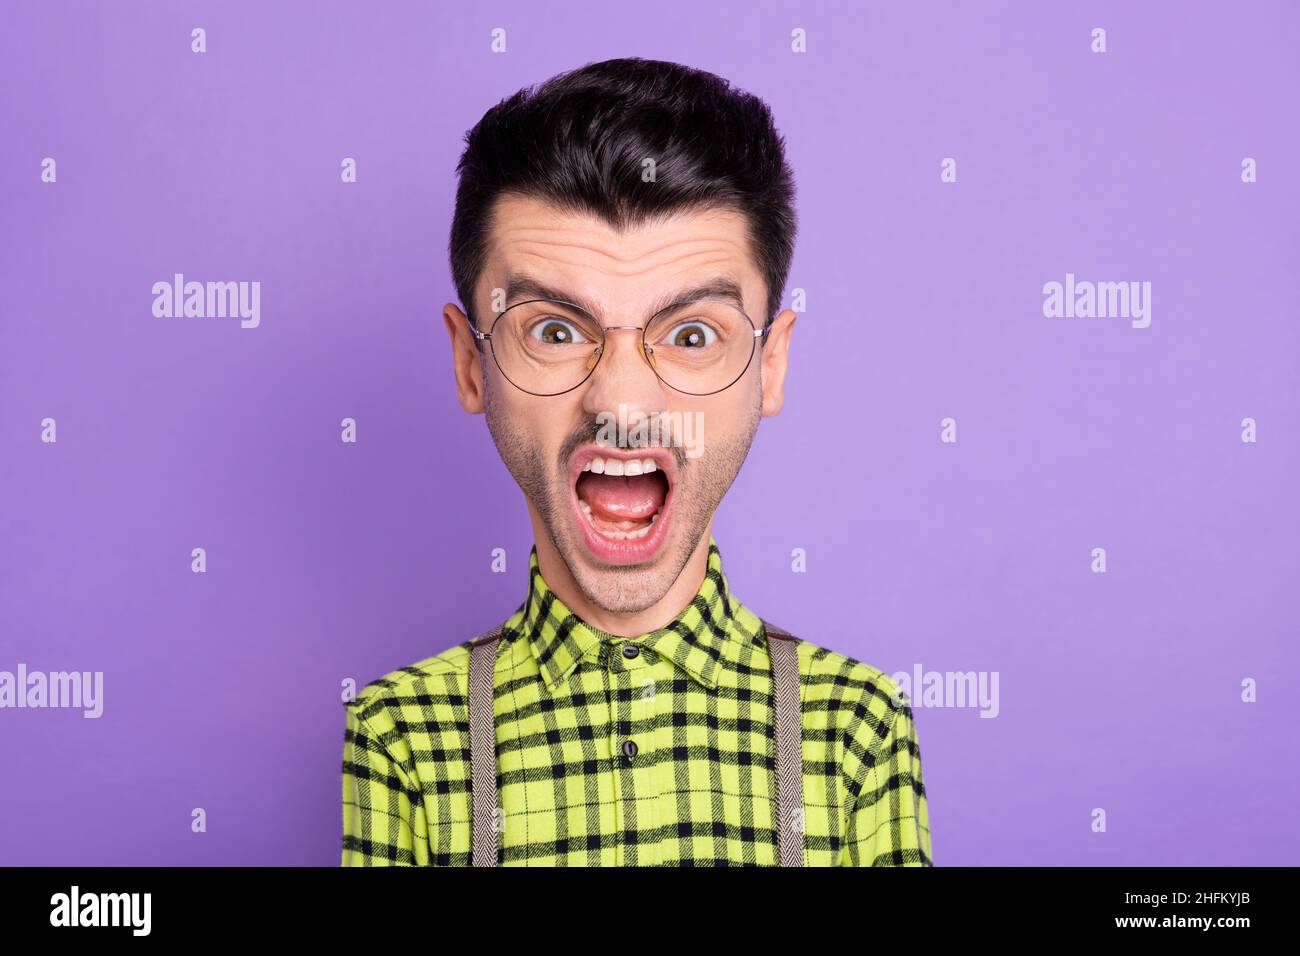 Photo portrait of enraged screaming deadline huge head man isolated on vivid violet colored background Stock Photo